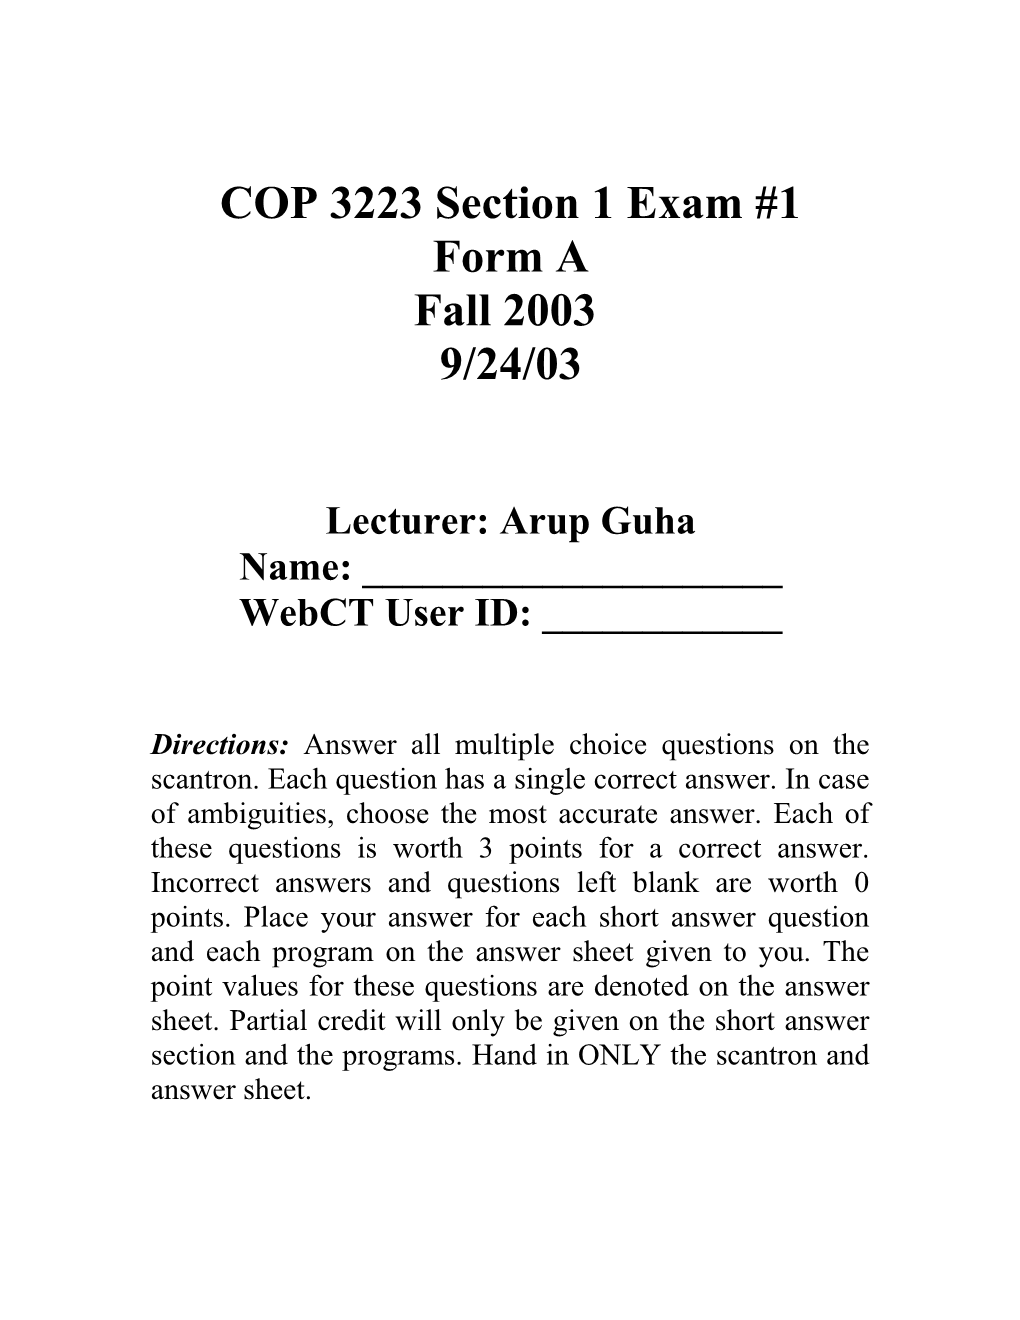 COP 3223 Section 1 Exam #1